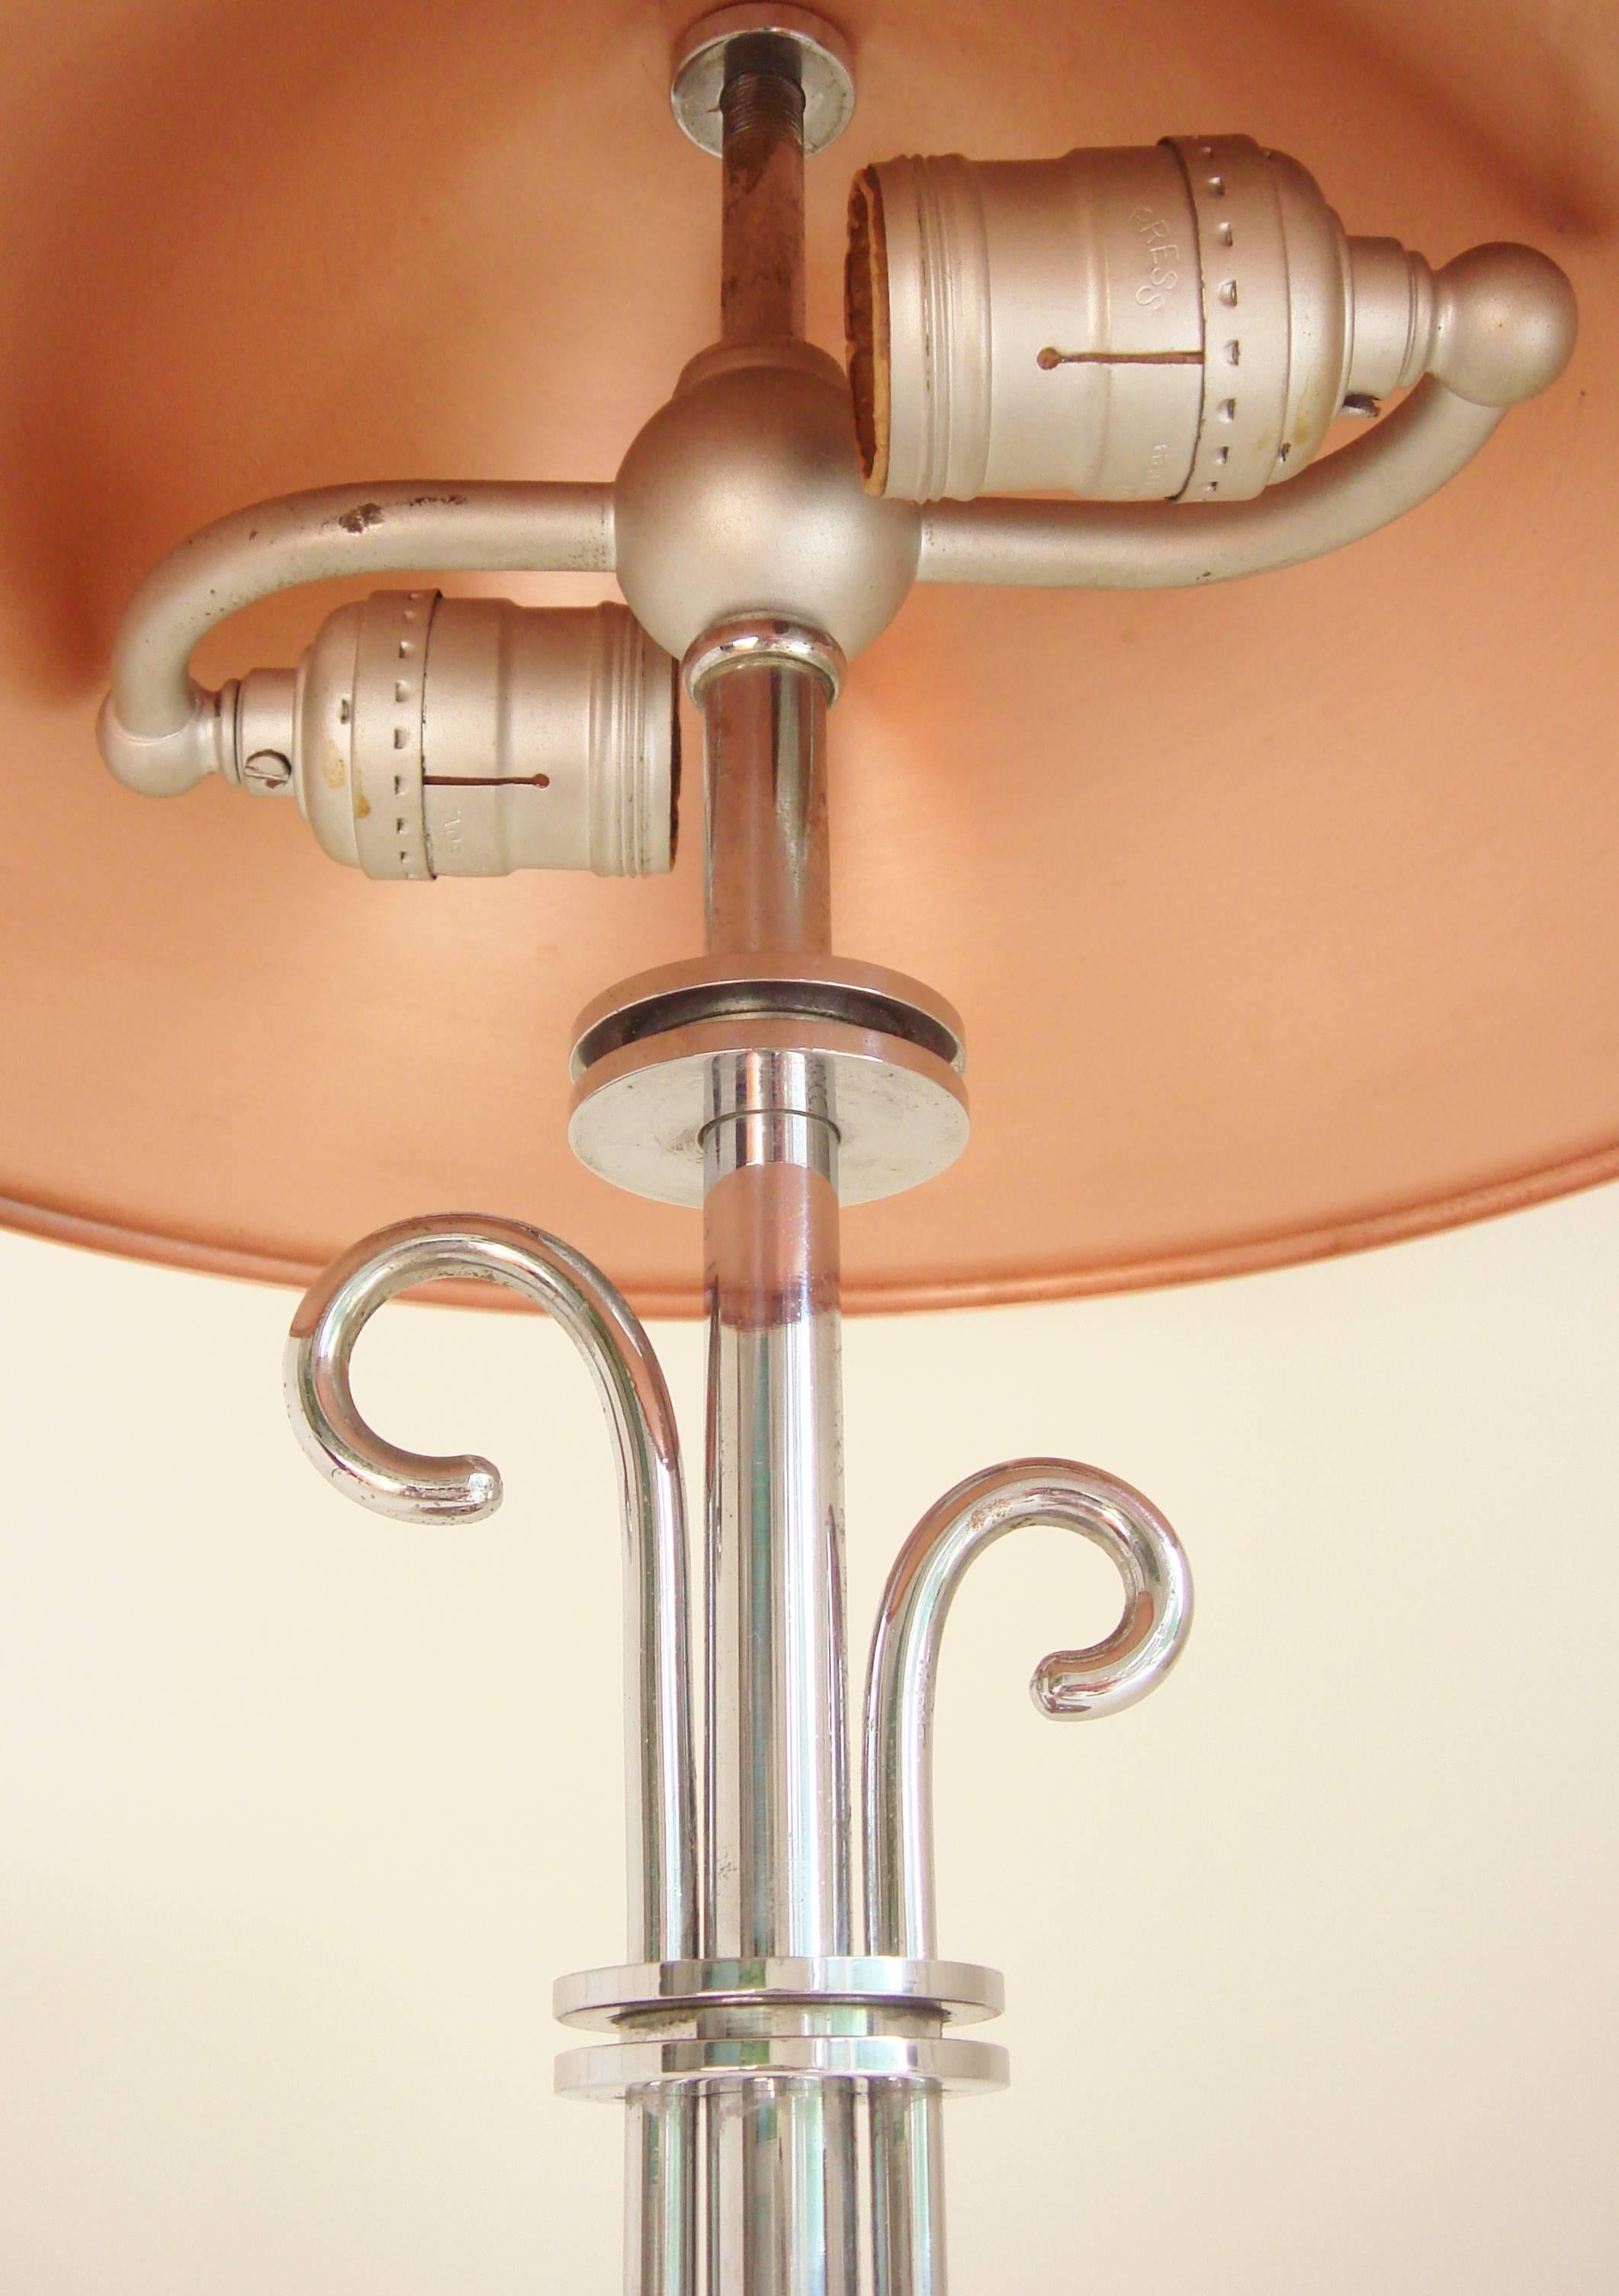 Mid-20th Century American Art Deco Chrome and Copper Organic Mushroom Lamp with Tendril Accents